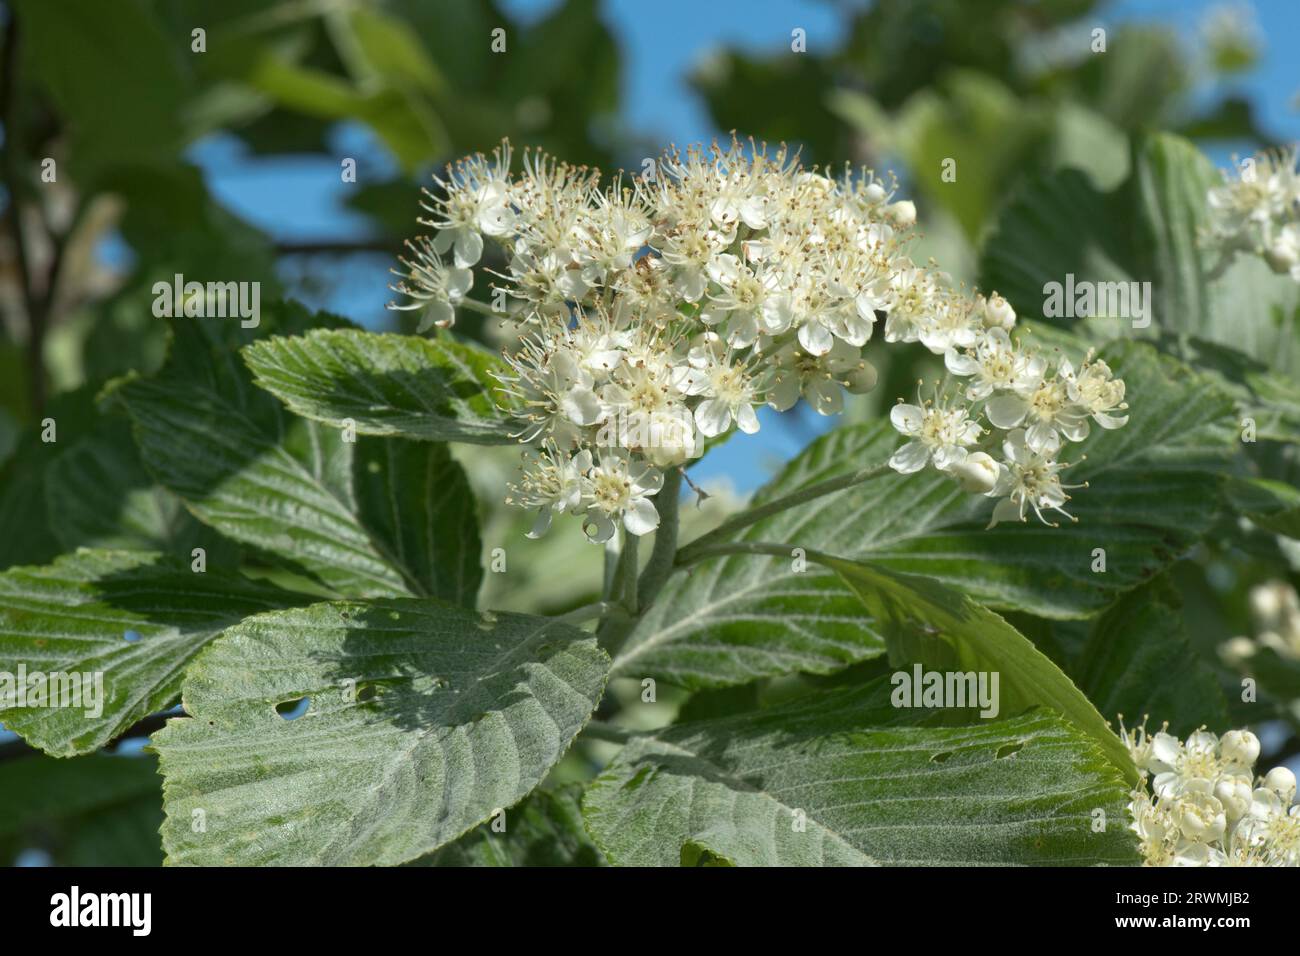 Whitebeam (Sorbus aria) white flower cluster among young glaucous hairy felty leaves in spring, Berkshire, May Stock Photo